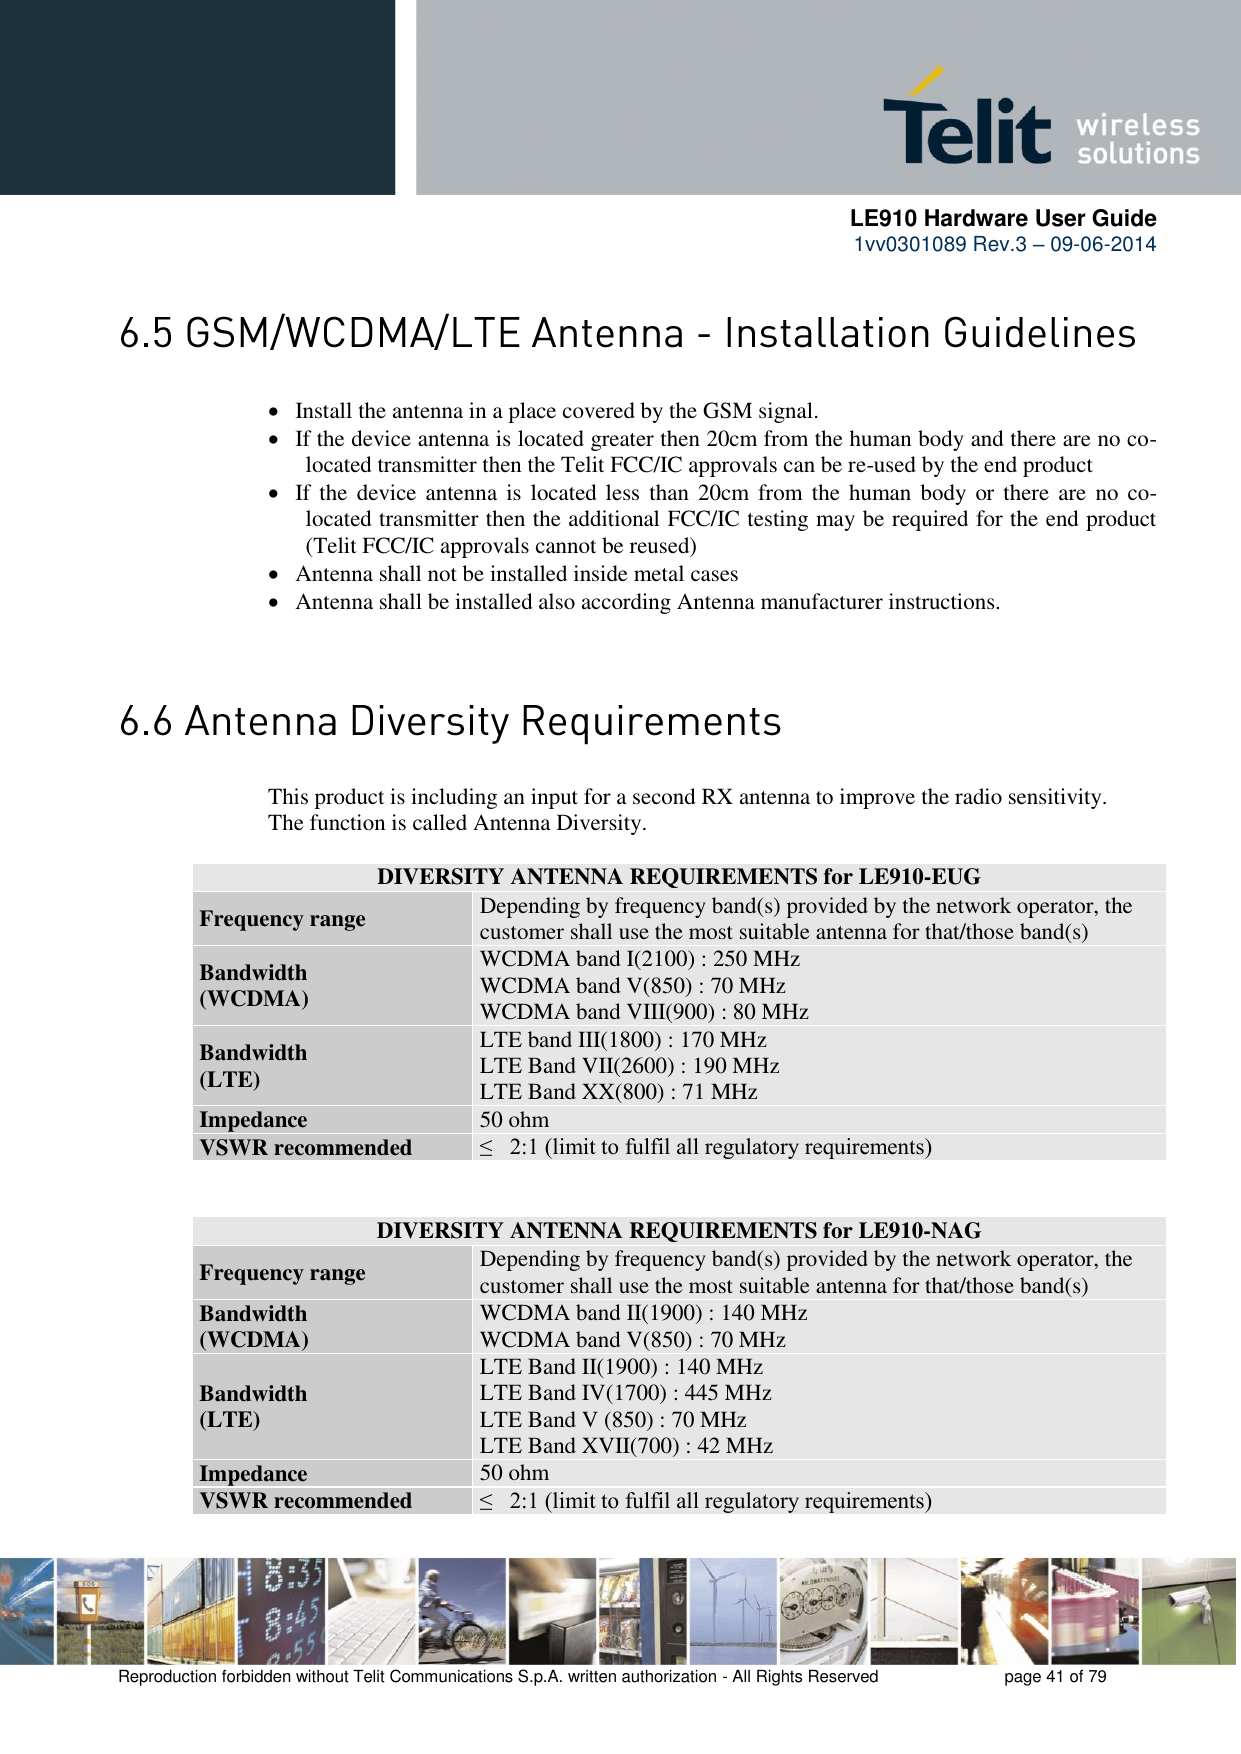      LE910 Hardware User Guide 1vv0301089 Rev.3 – 09-06-2014    Reproduction forbidden without Telit Communications S.p.A. written authorization - All Rights Reserved    page 41 of 79    Install the antenna in a place covered by the GSM signal.  If the device antenna is located greater then 20cm from the human body and there are no co-located transmitter then the Telit FCC/IC approvals can be re-used by the end product  If the  device antenna is located less  than  20cm  from the  human body or there  are  no  co-located transmitter then the additional FCC/IC testing may be required for the end product (Telit FCC/IC approvals cannot be reused)  Antenna shall not be installed inside metal cases   Antenna shall be installed also according Antenna manufacturer instructions.    This product is including an input for a second RX antenna to improve the radio sensitivity.  The function is called Antenna Diversity.  DIVERSITY ANTENNA REQUIREMENTS for LE910-EUG Frequency range Depending by frequency band(s) provided by the network operator, the customer shall use the most suitable antenna for that/those band(s) Bandwidth  (WCDMA) WCDMA band I(2100) : 250 MHz  WCDMA band V(850) : 70 MHz WCDMA band VIII(900) : 80 MHz  Bandwidth  (LTE) LTE band III(1800) : 170 MHz  LTE Band VII(2600) : 190 MHz  LTE Band XX(800) : 71 MHz  Impedance 50 ohm VSWR recommended ≤   2:1 (limit to fulfil all regulatory requirements)  DIVERSITY ANTENNA REQUIREMENTS for LE910-NAG Frequency range Depending by frequency band(s) provided by the network operator, the customer shall use the most suitable antenna for that/those band(s) Bandwidth  (WCDMA) WCDMA band II(1900) : 140 MHz  WCDMA band V(850) : 70 MHz  Bandwidth  (LTE) LTE Band II(1900) : 140 MHz  LTE Band IV(1700) : 445 MHz  LTE Band V (850) : 70 MHz  LTE Band XVII(700) : 42 MHz  Impedance 50 ohm VSWR recommended ≤   2:1 (limit to fulfil all regulatory requirements) 